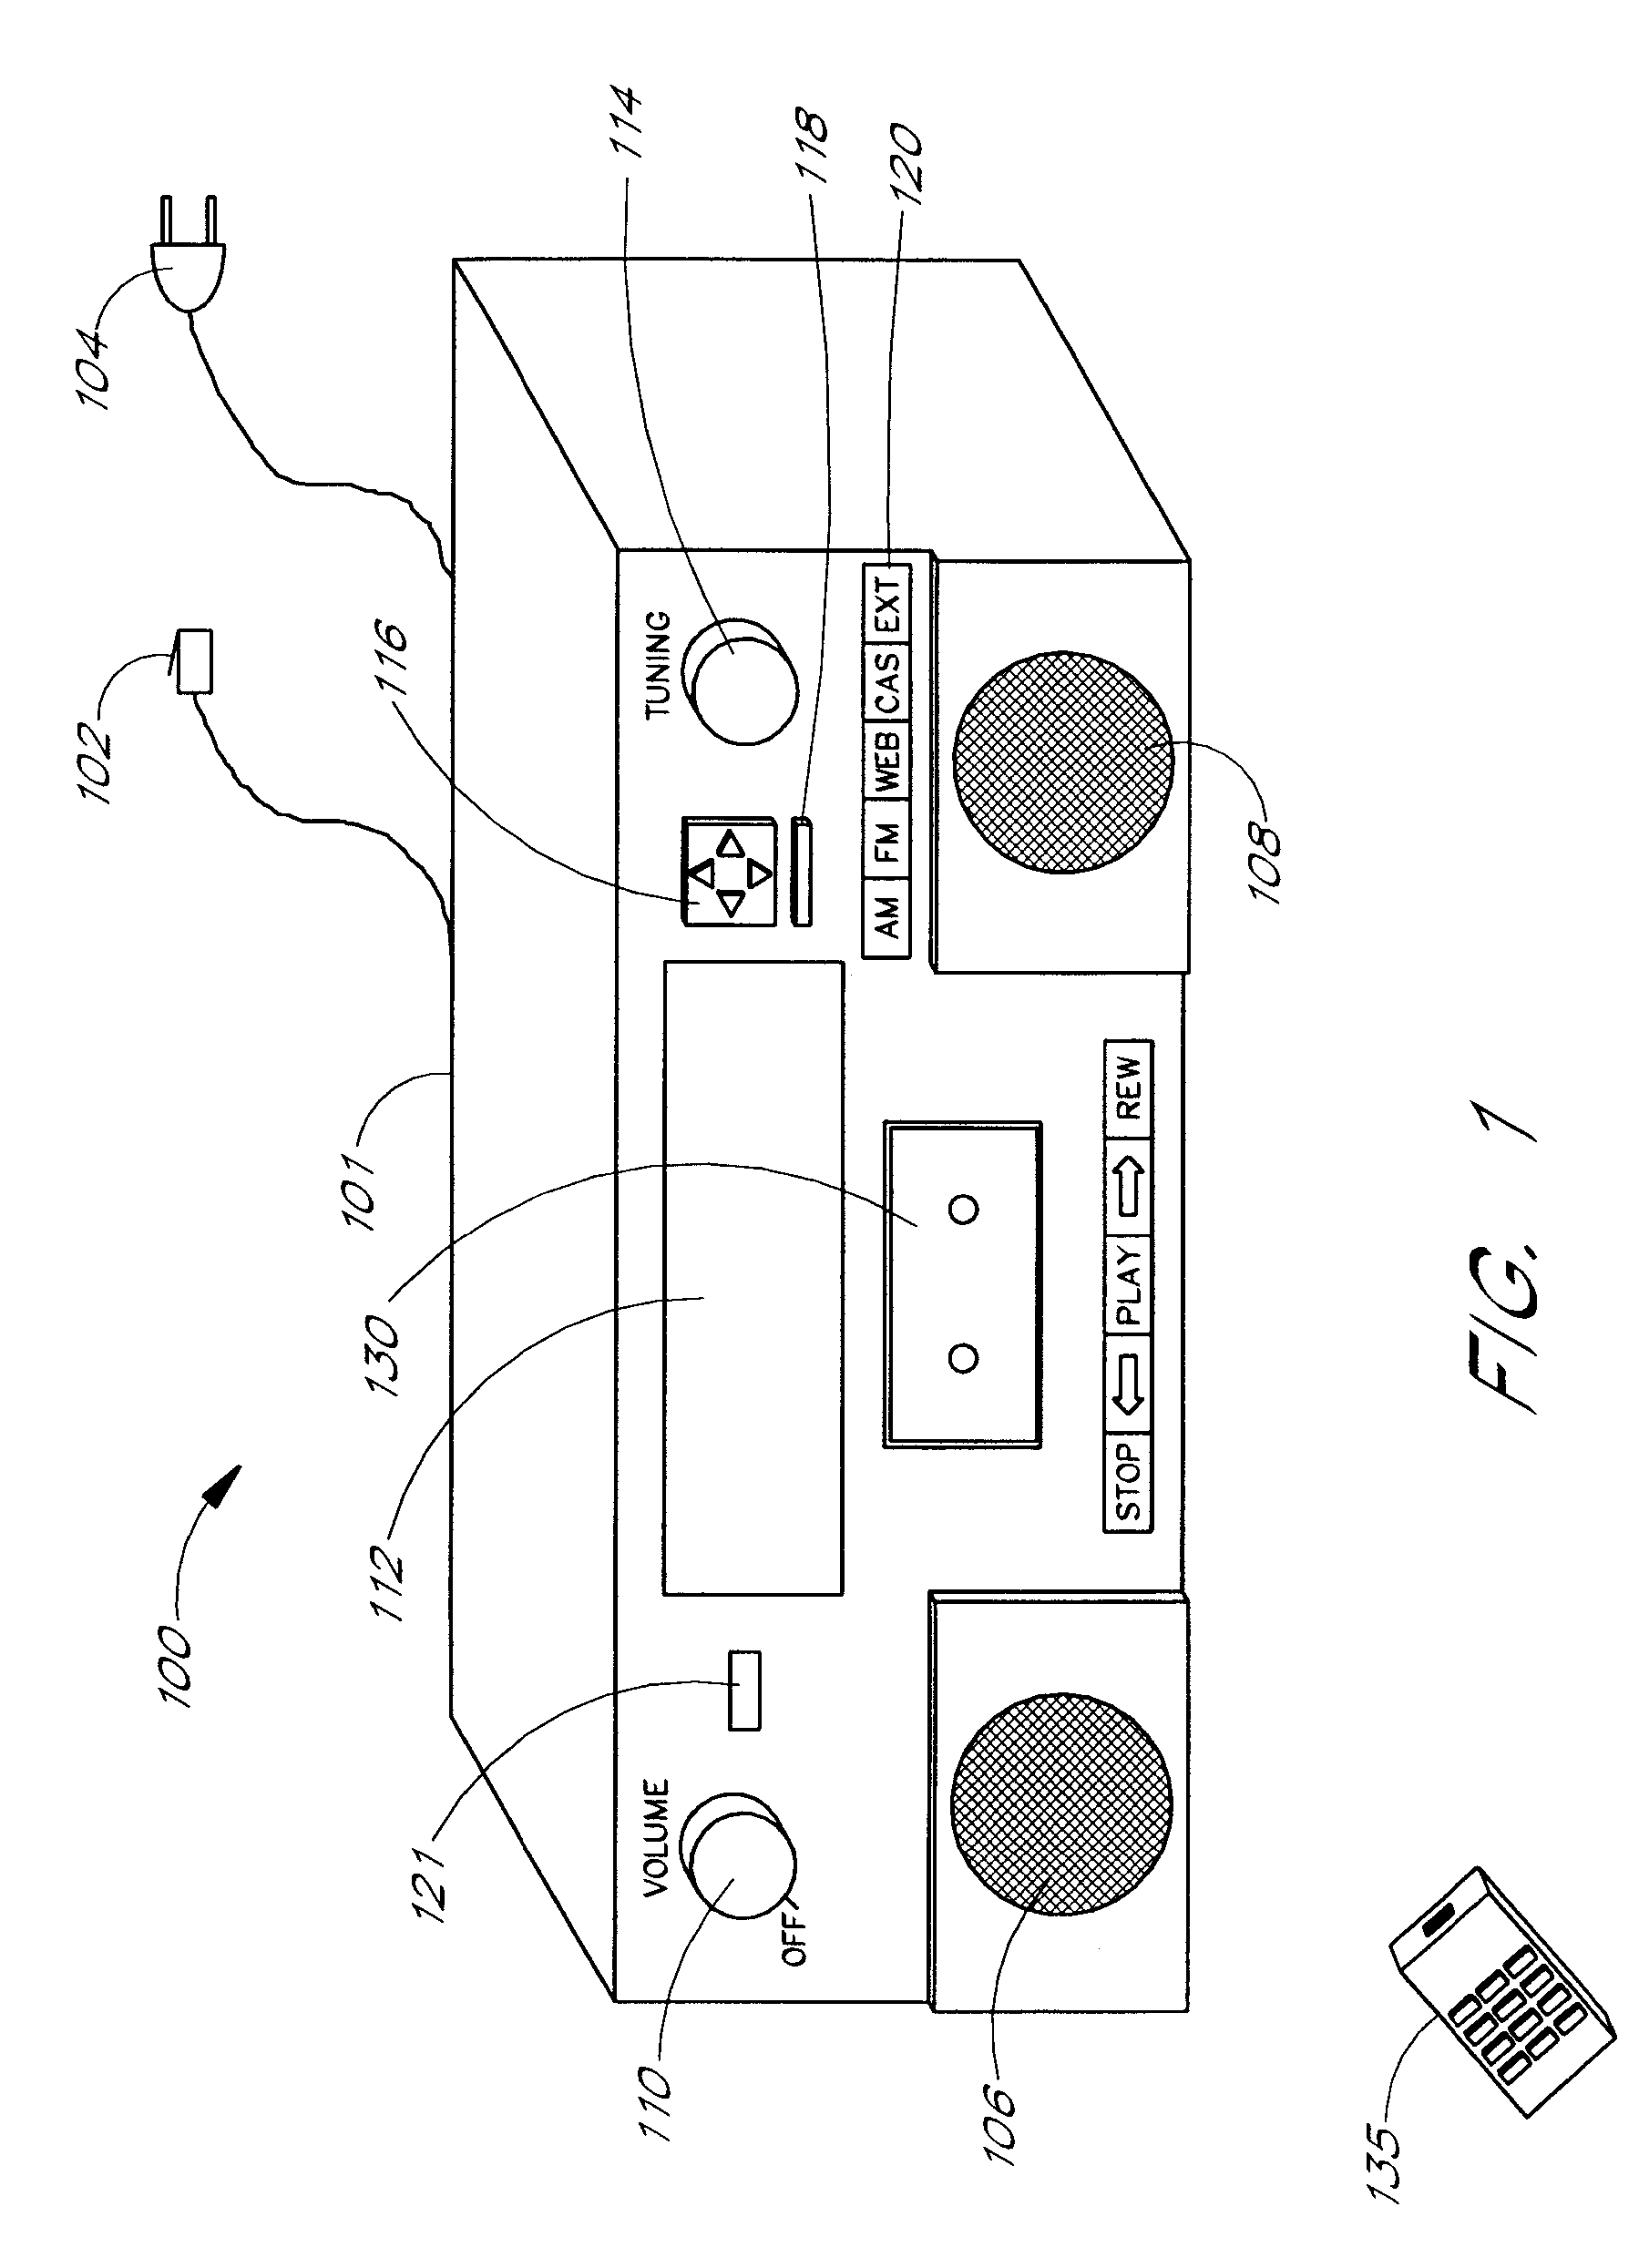 Network-enabled audio device